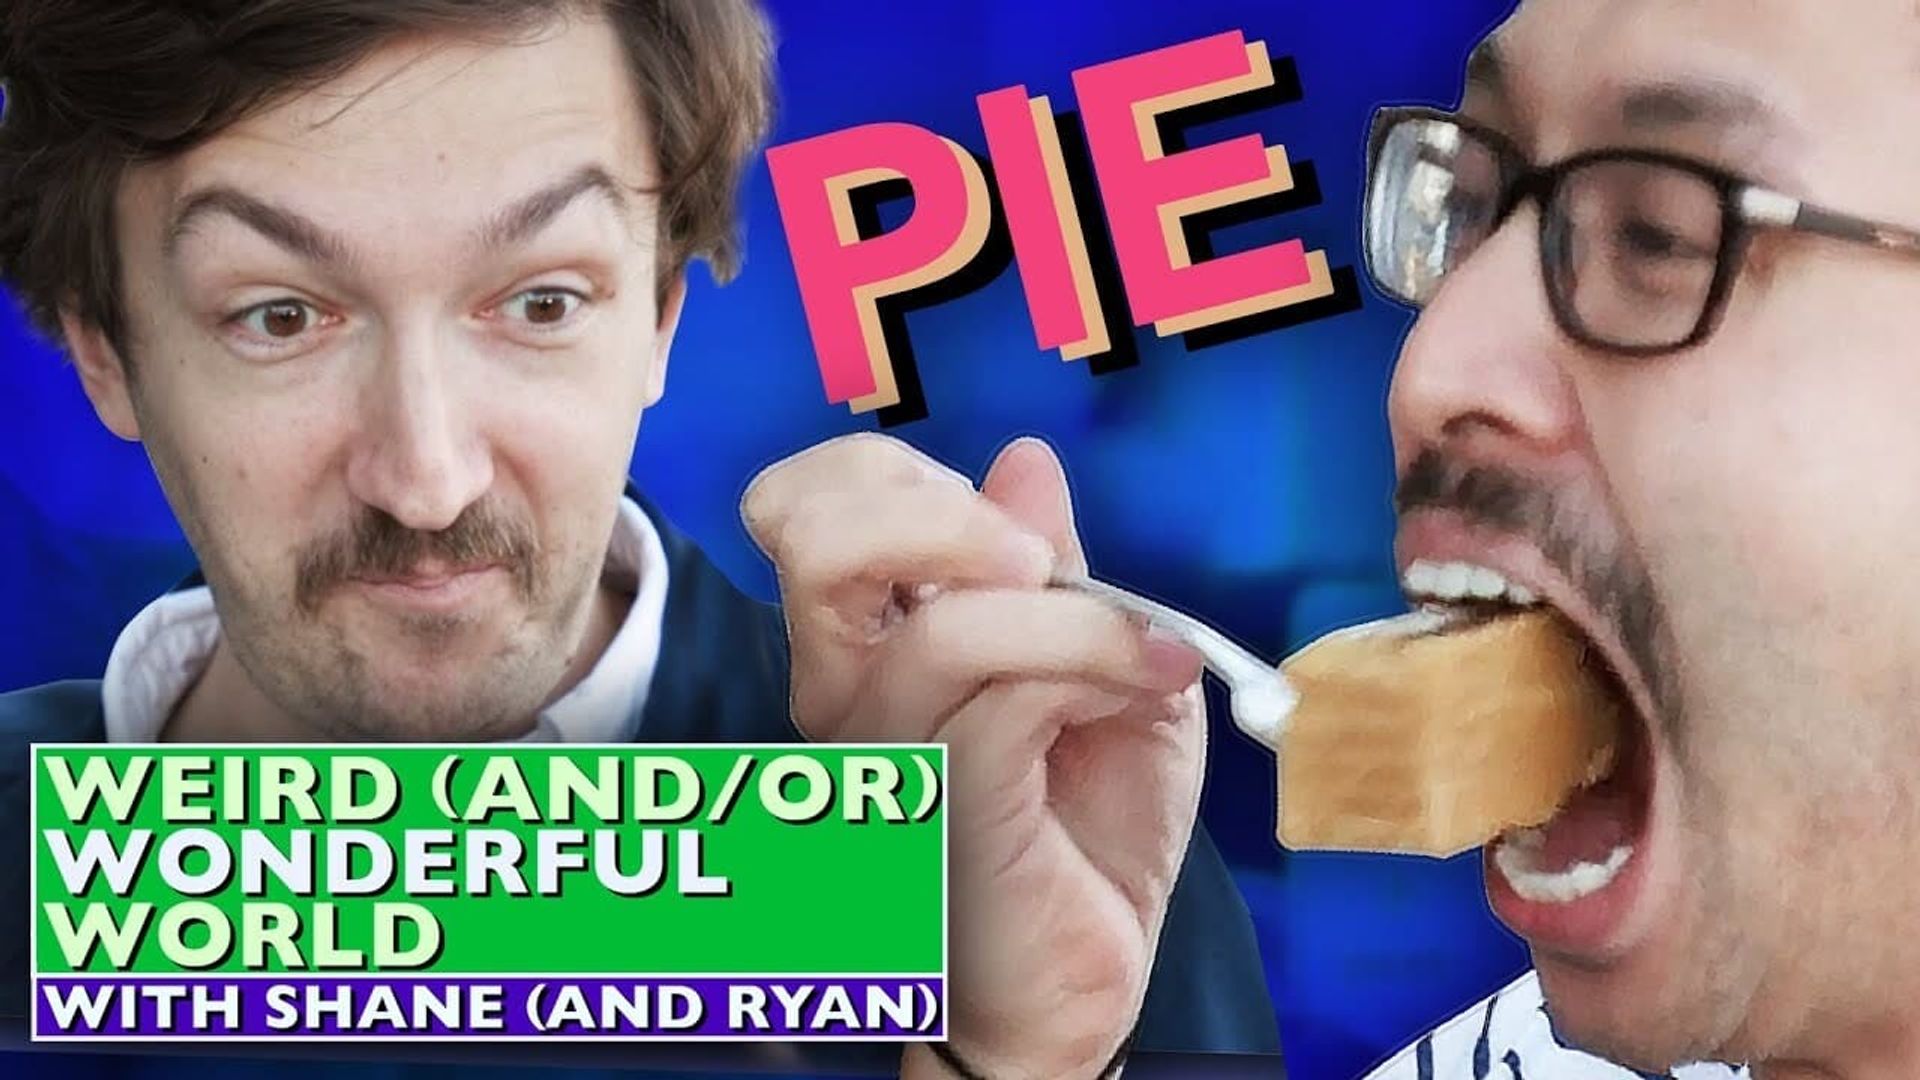 Weird (and/or) Wonderful World with Shane (and Ryan) background